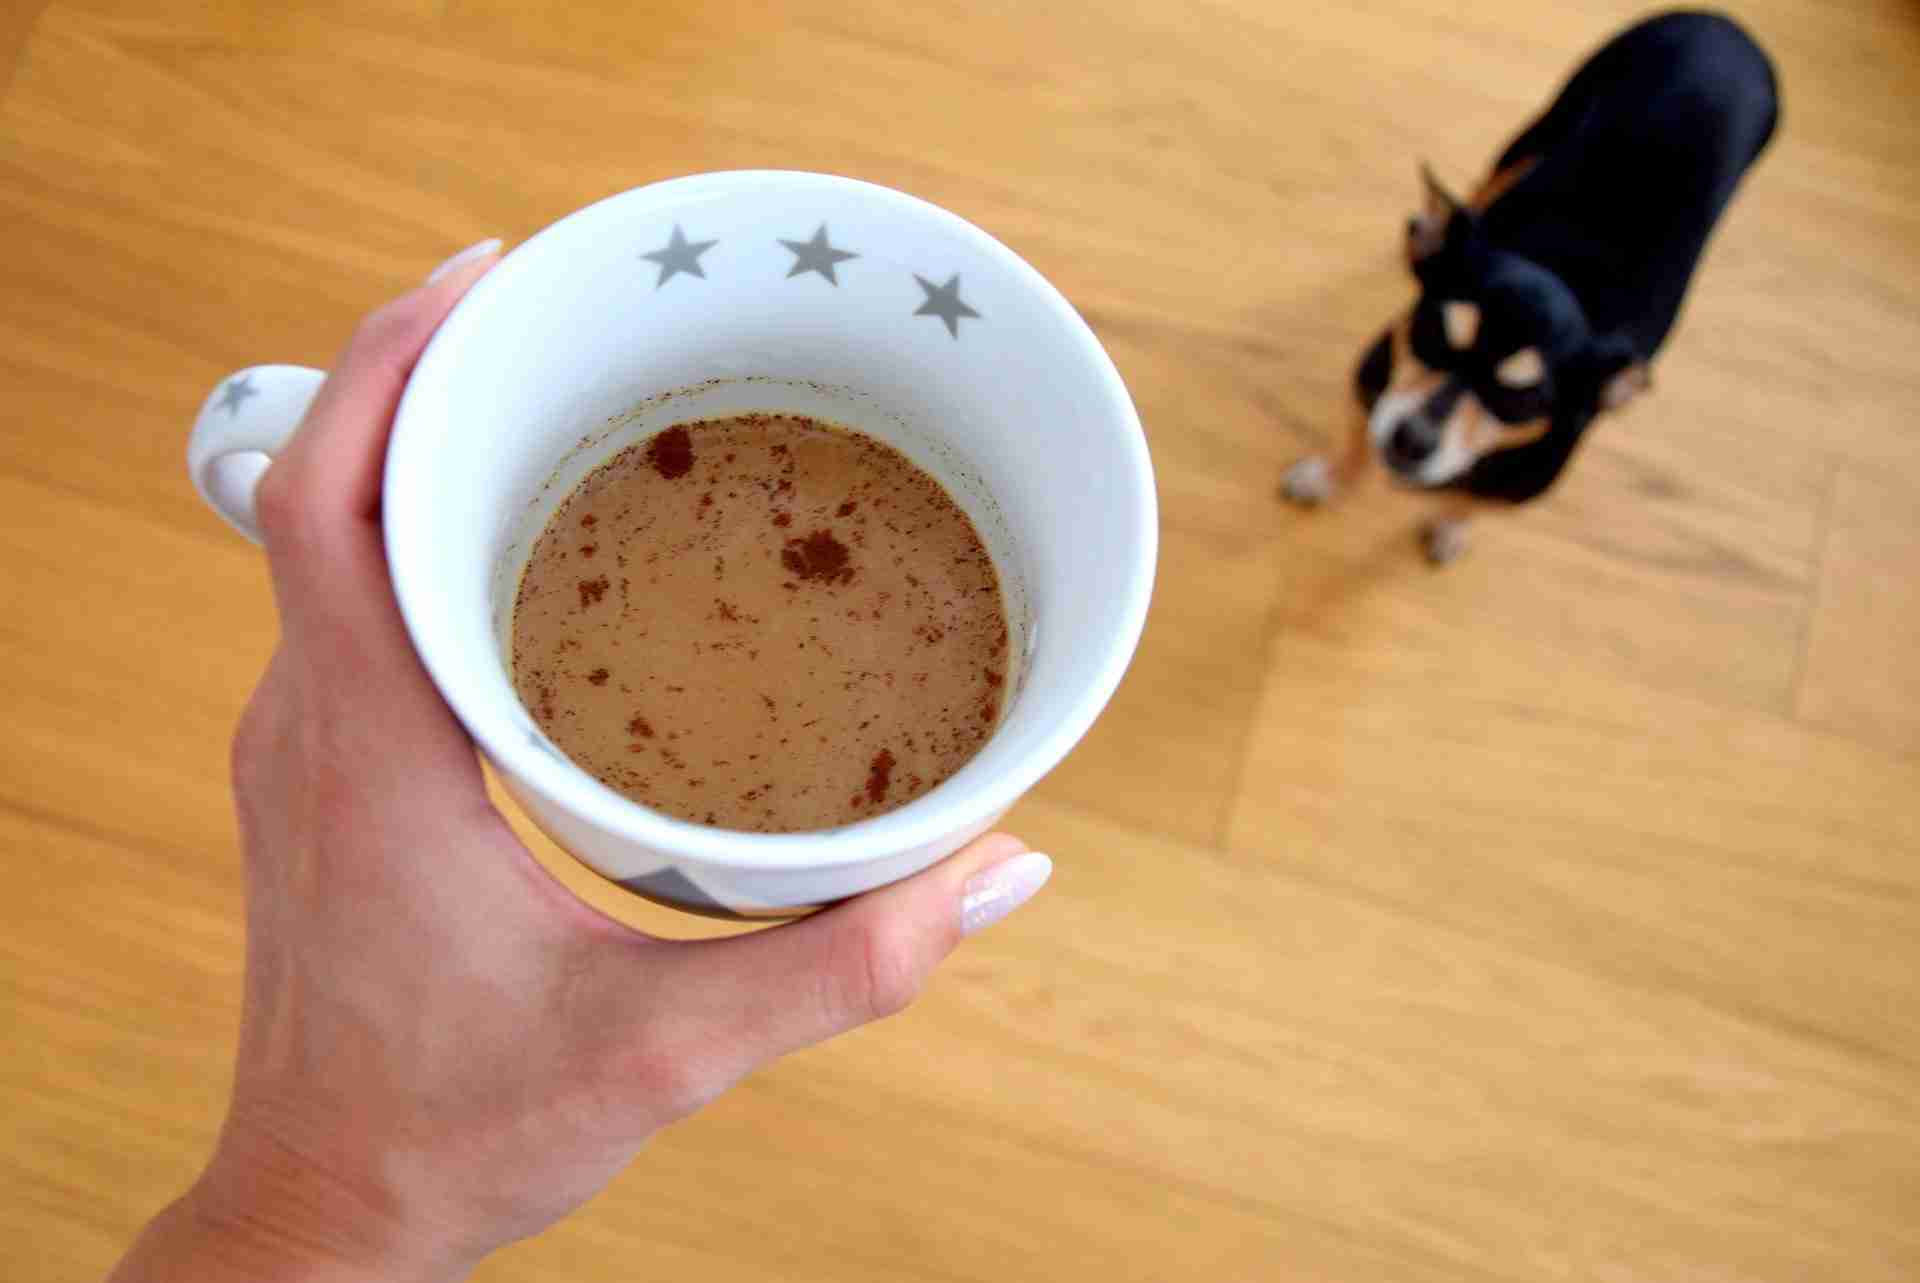 Pet & Caffeine Safety: Can Dogs Have Coffee? - Coffee Informer